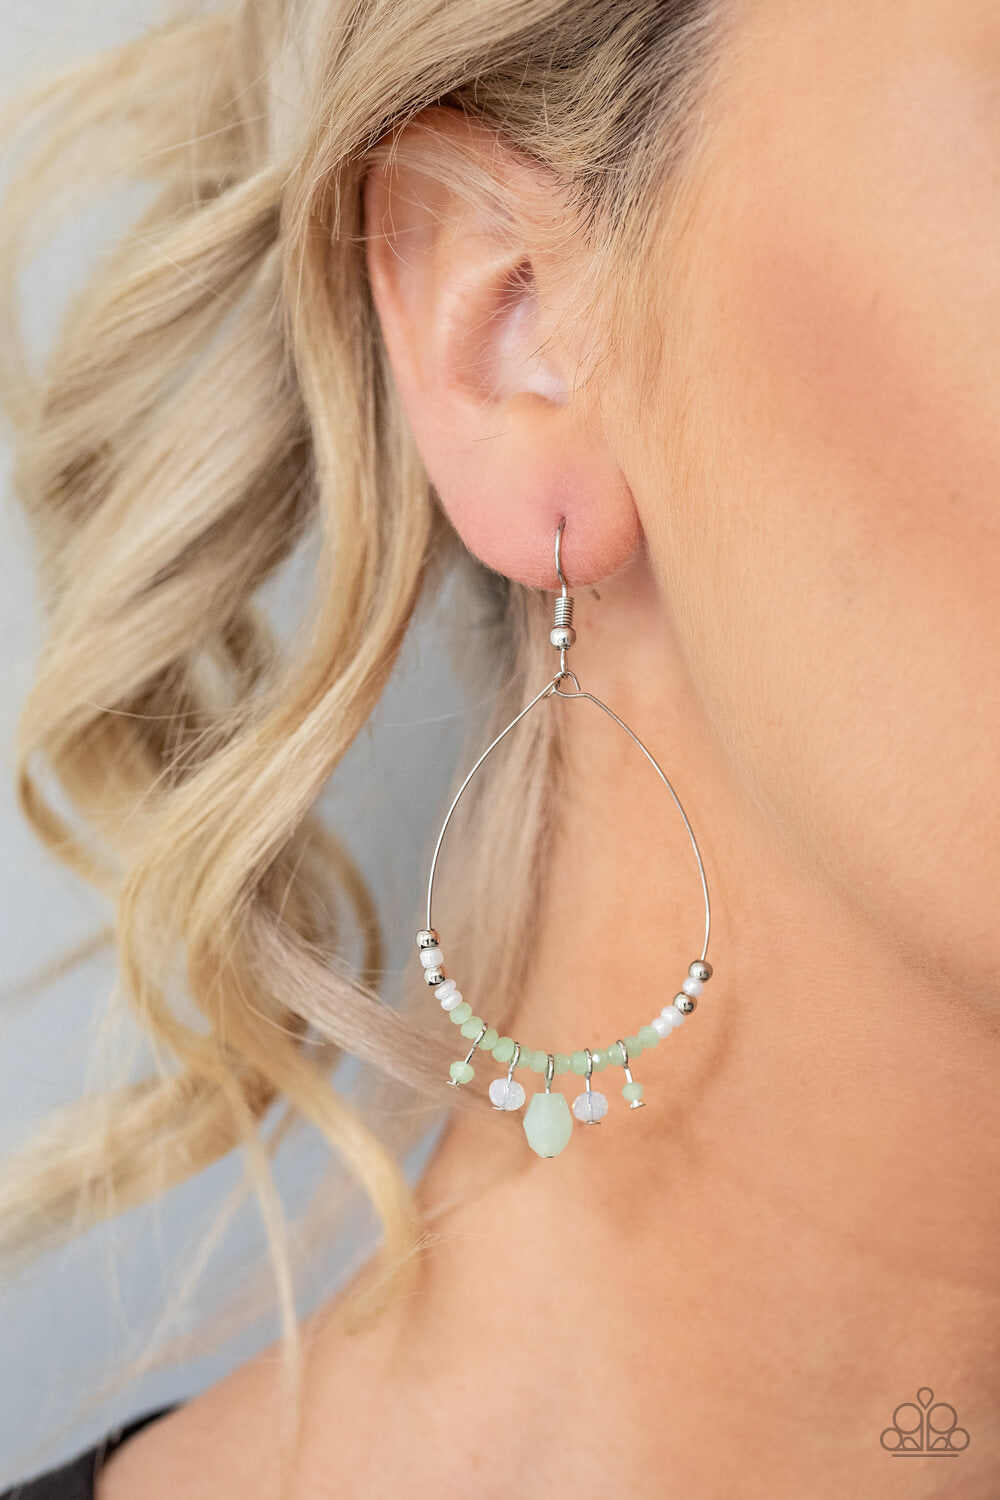 Exquisitely Ethereal - Green Earrings - Princess Glam Shop